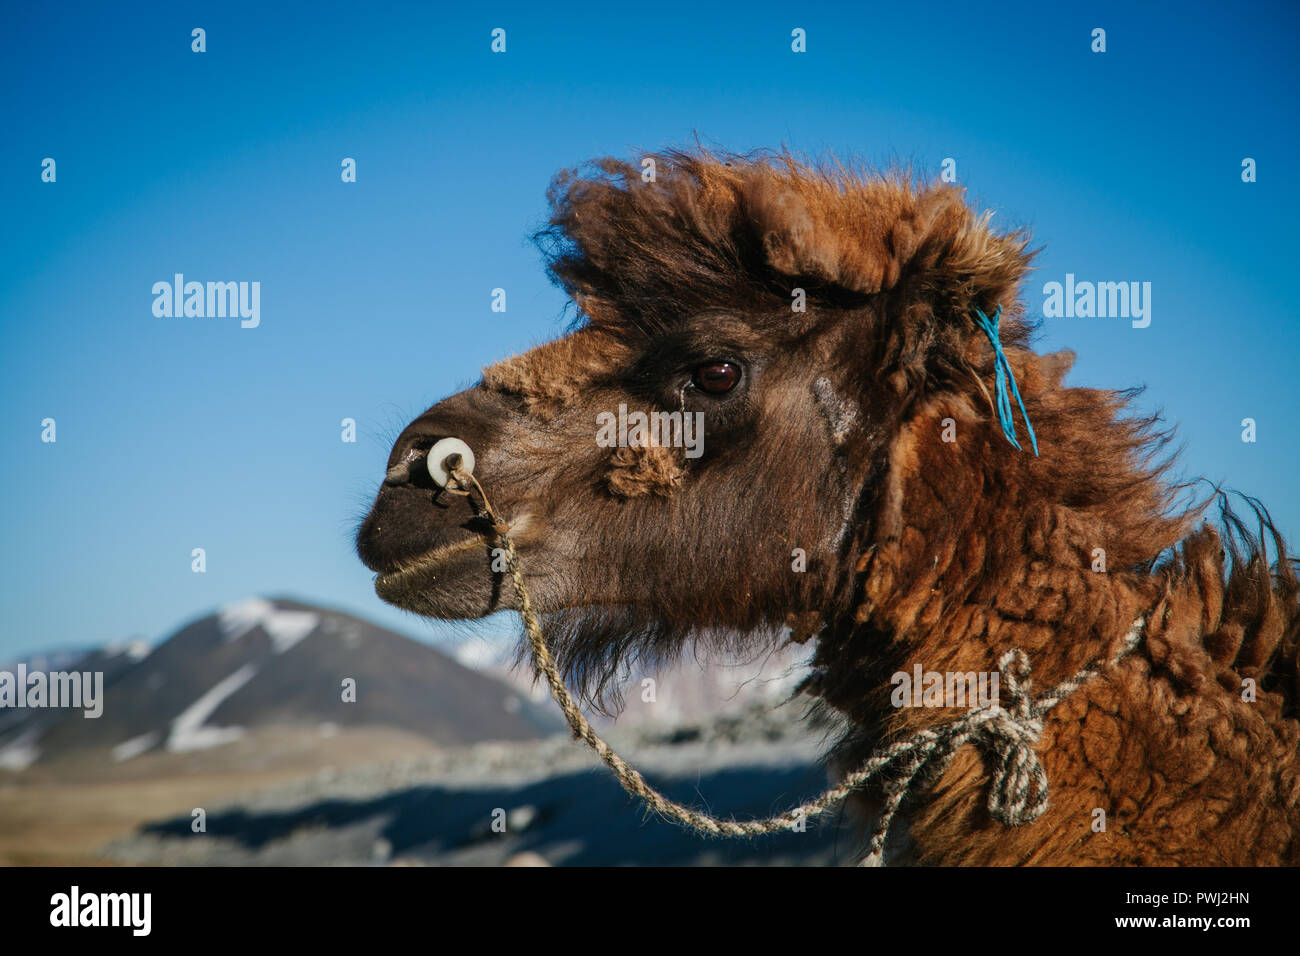 Closeup portrait of a woolly Bactrian camel in western Mongolia, mountains in the distance. Bayan olgii, Mongolia Stock Photo